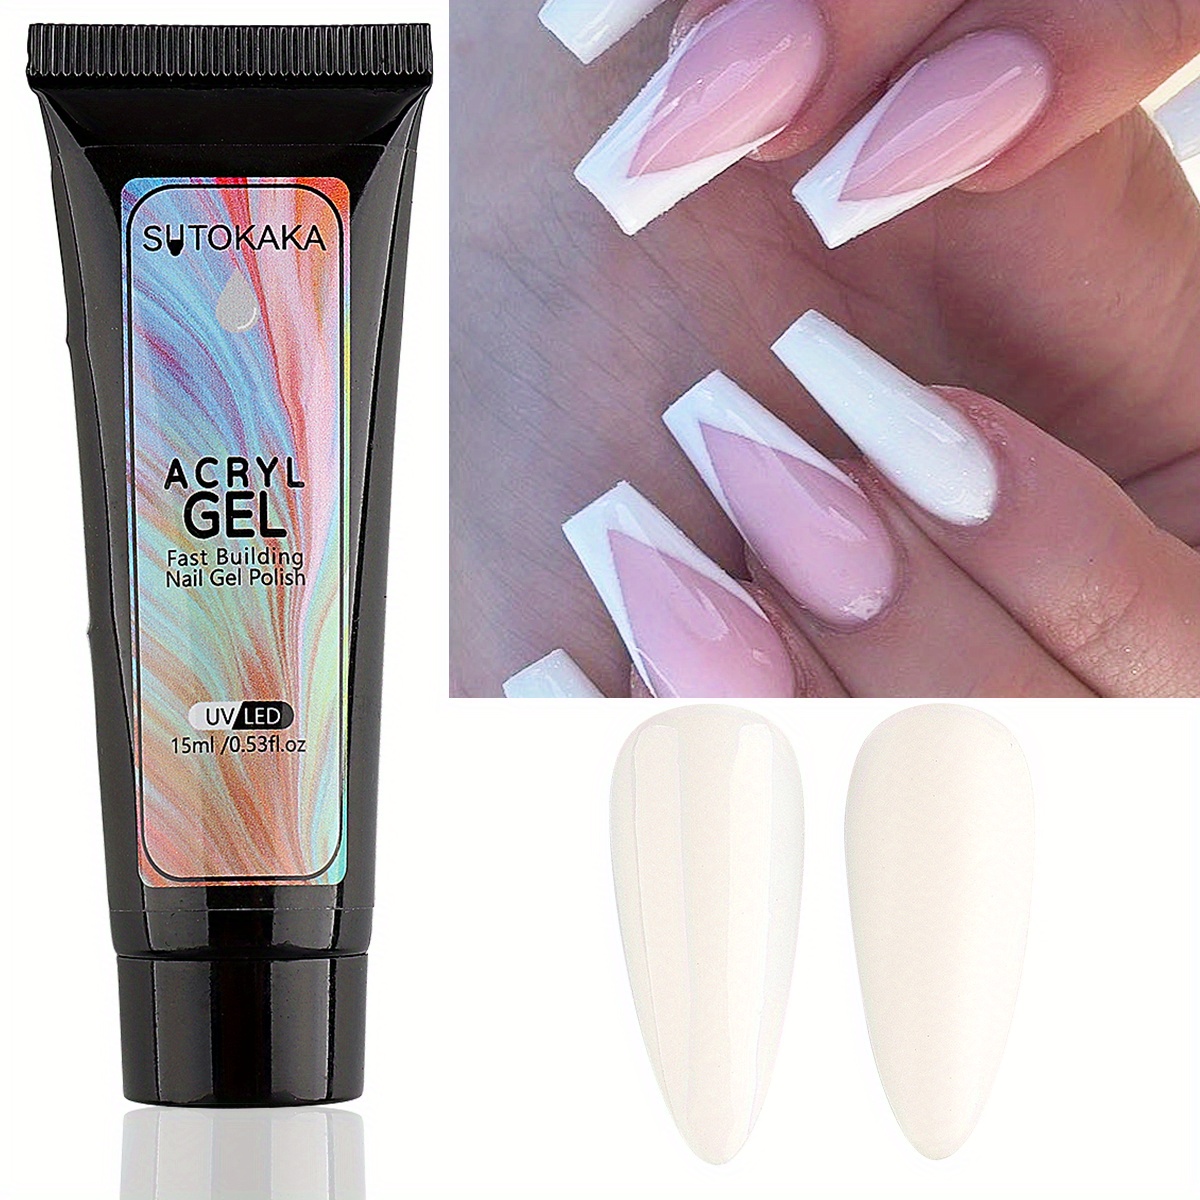 Pure white gel polish by @Dynamic Nail Supply Prettiest pink acry, Nail Tech